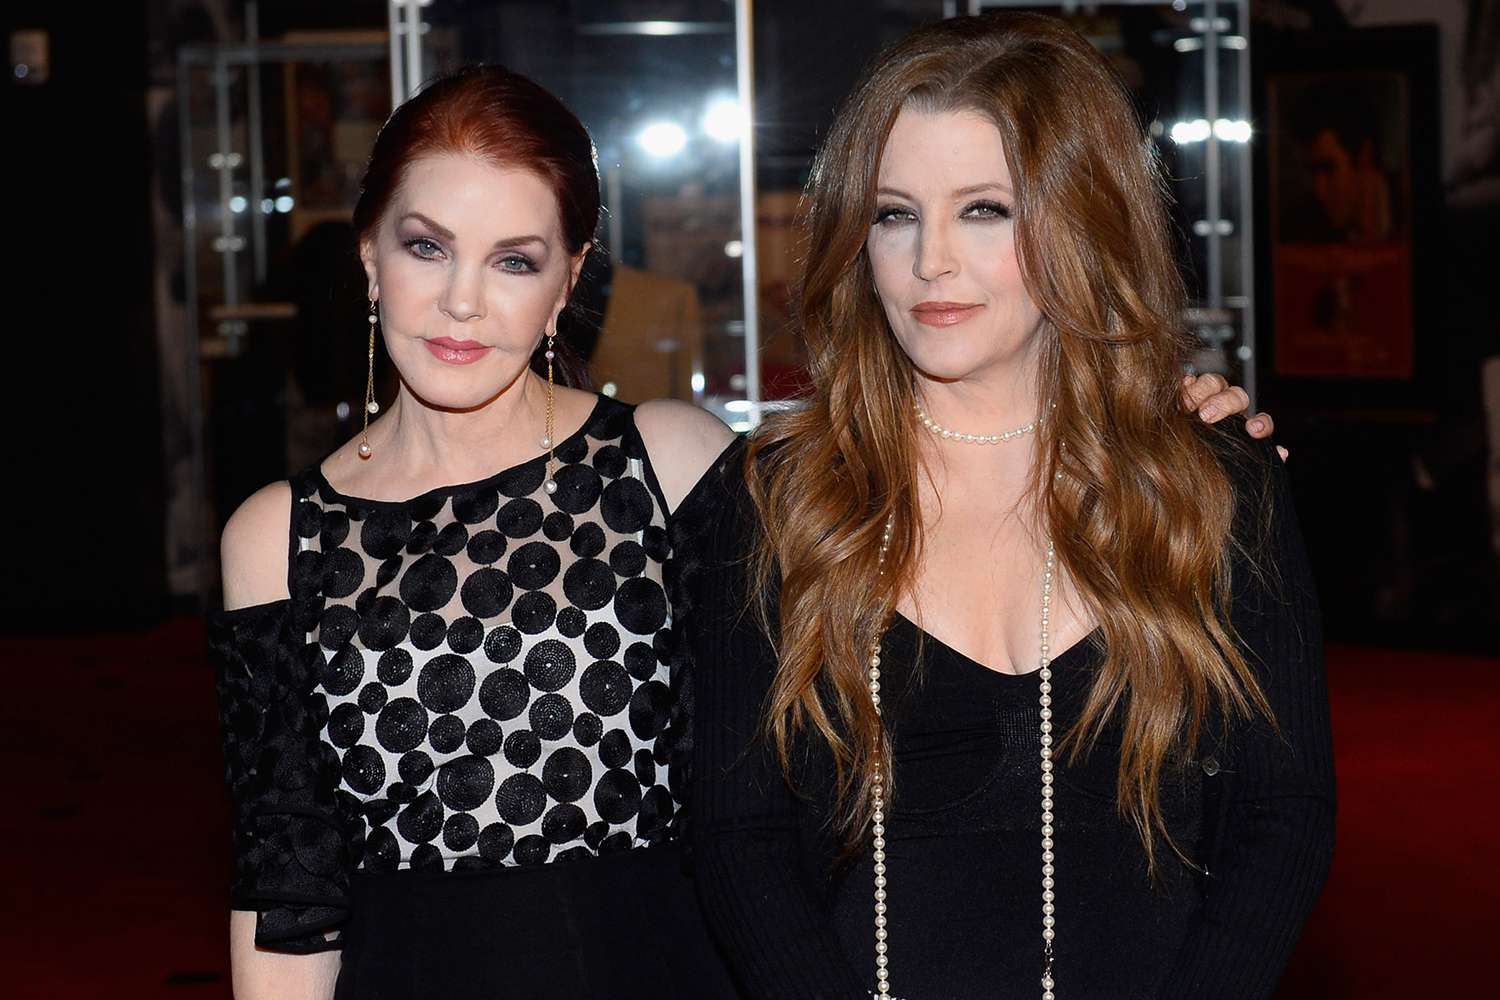 Priscilla Presley Slams ‘Noise’ amid Lisa Marie Believe Fight, Says She’s Challenging Forward with ‘Integrity and Admire’